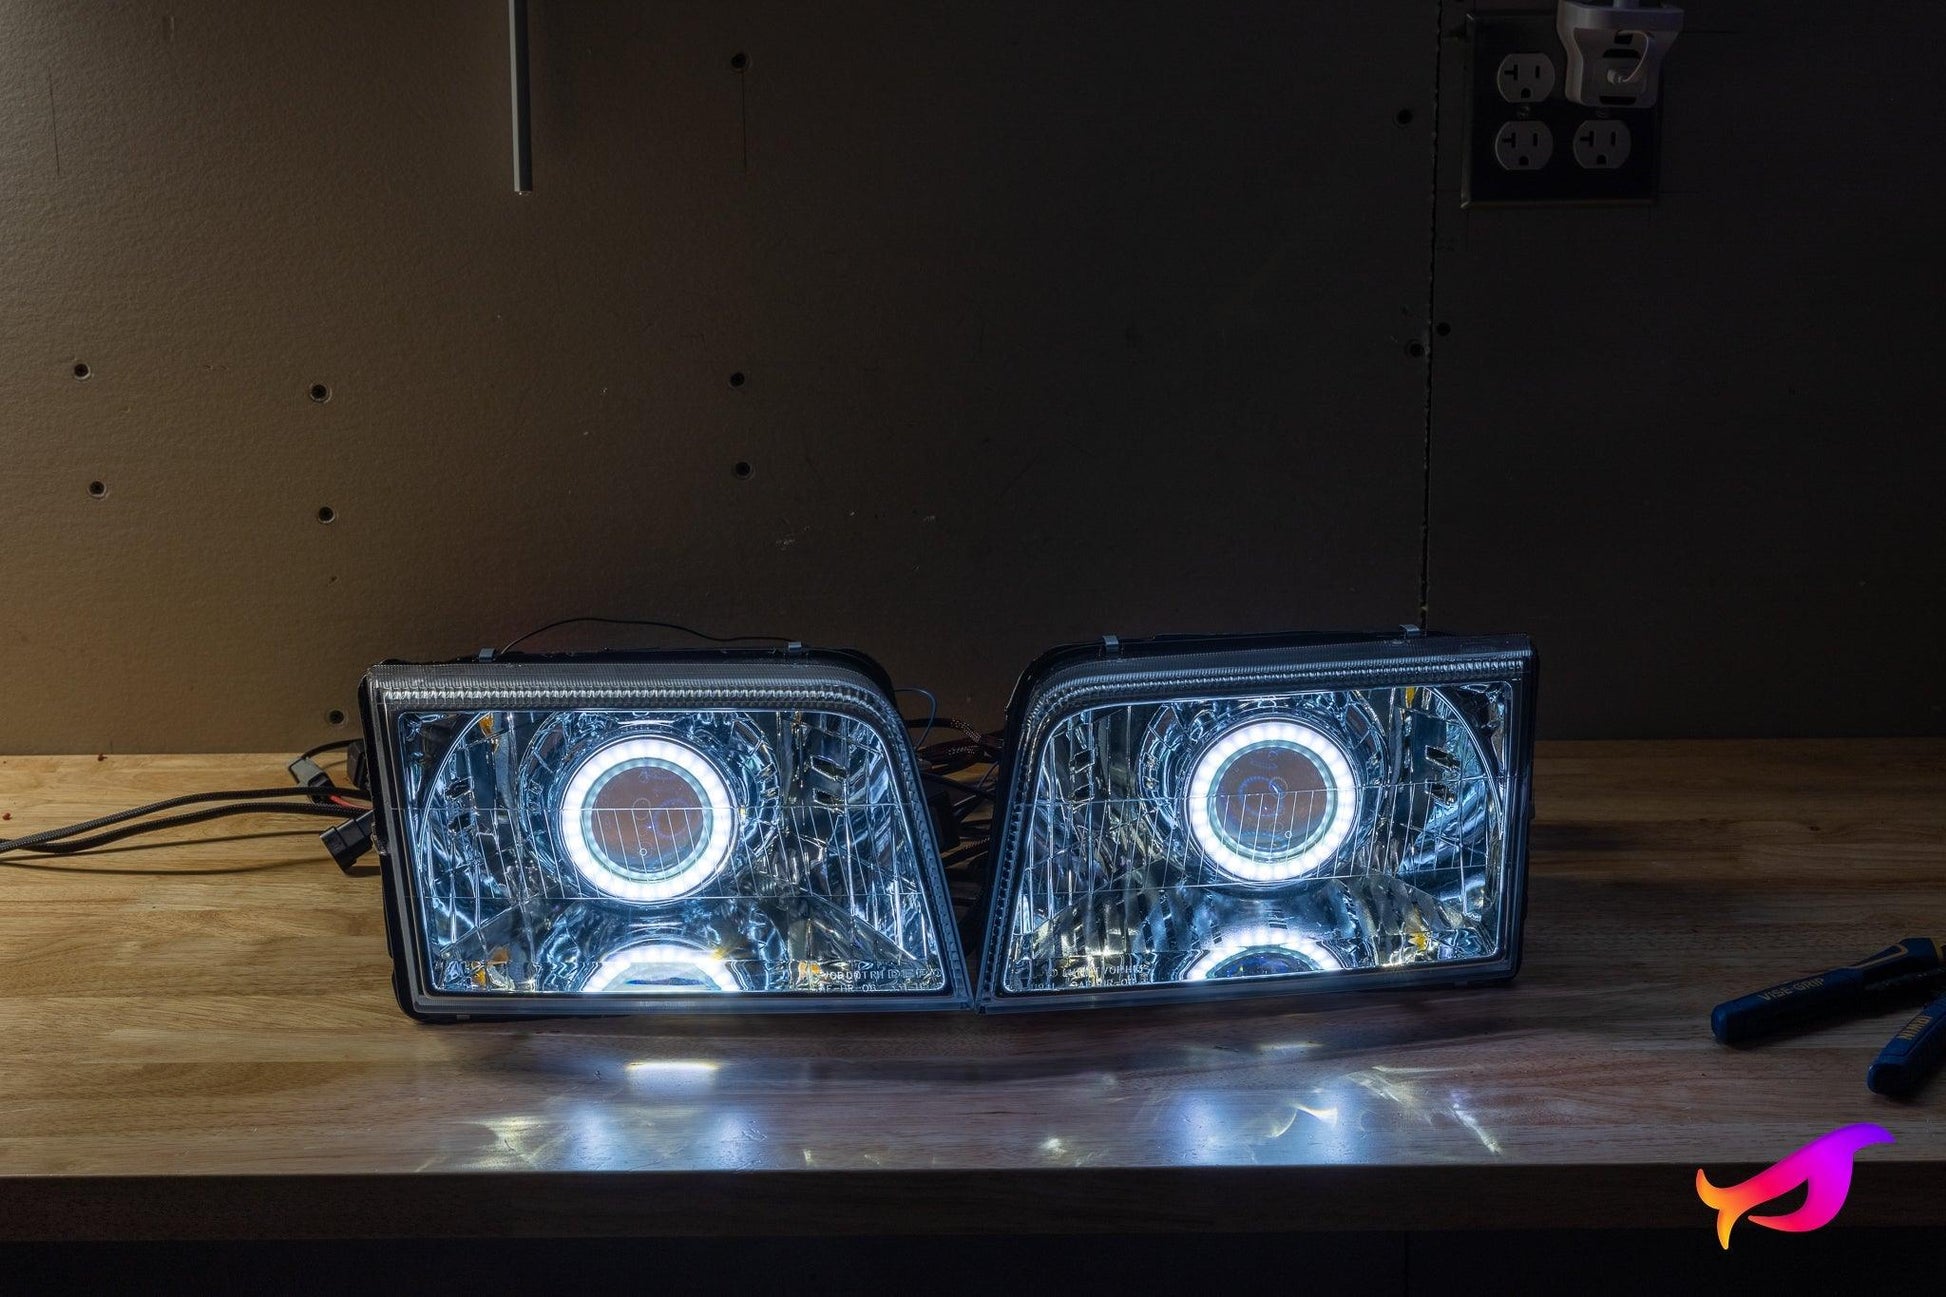 Mercury Grand Marquis (06-11) - Panther Lights